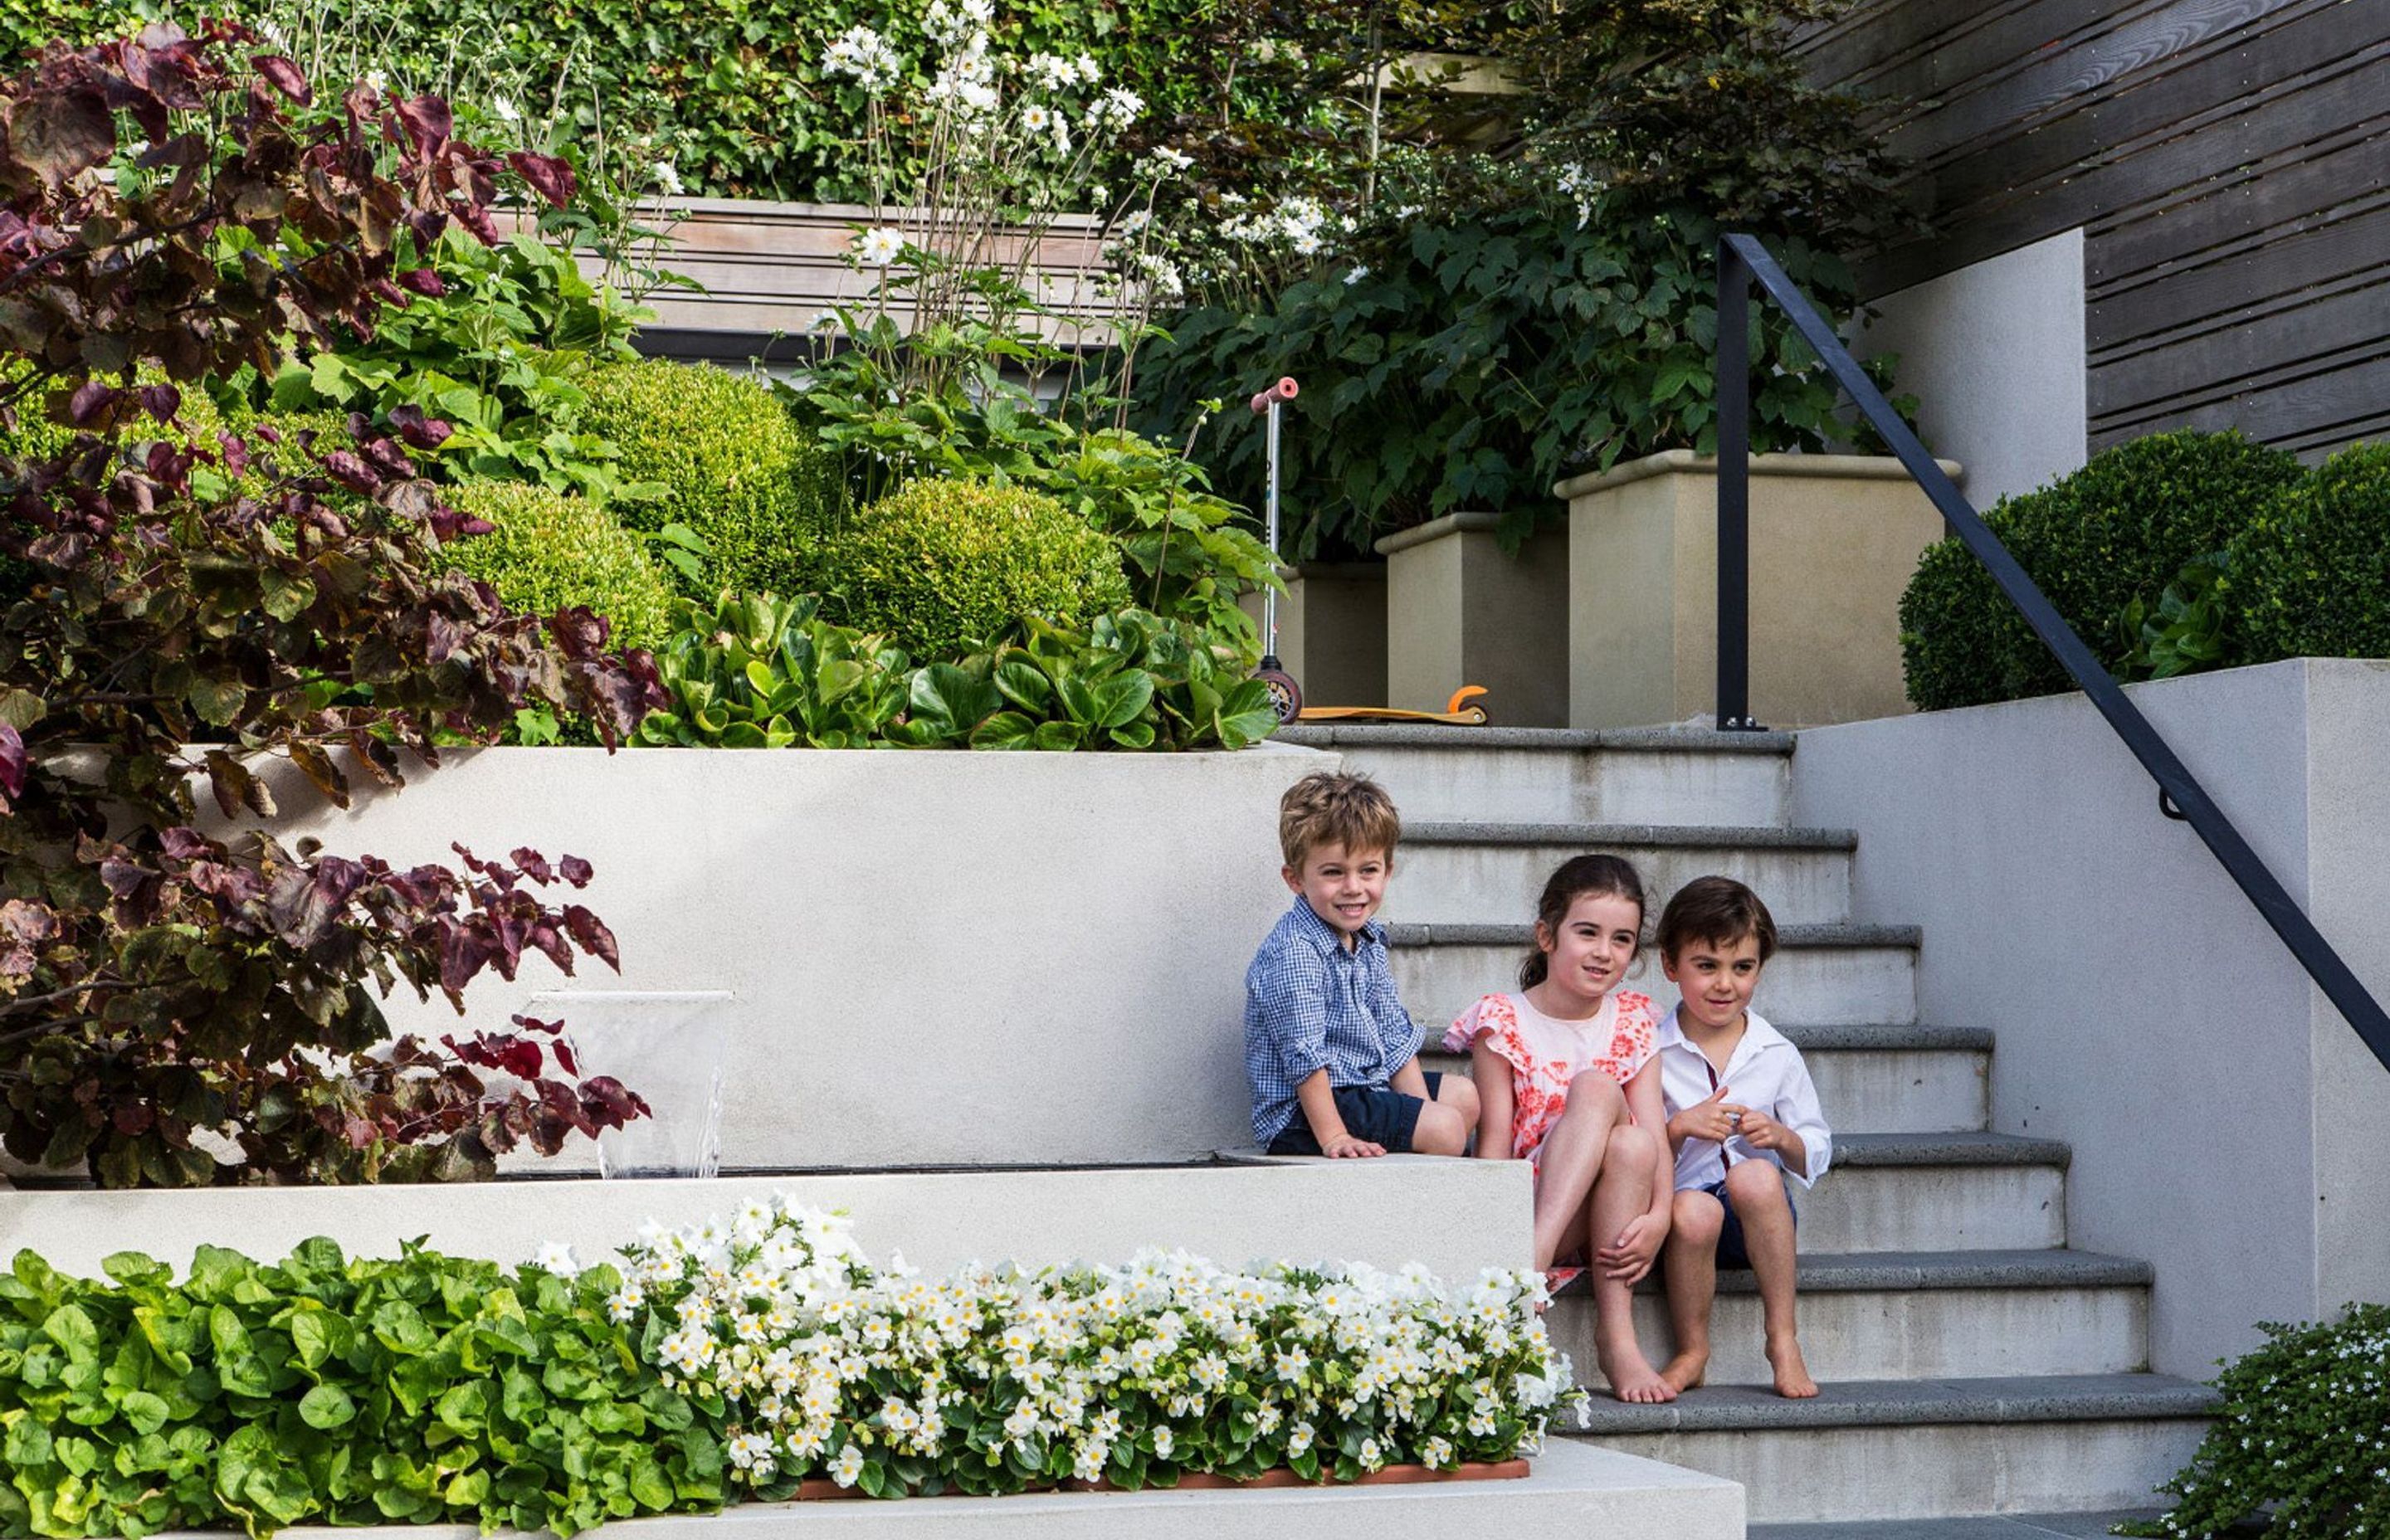 Sloping site transformed into family friendly garden